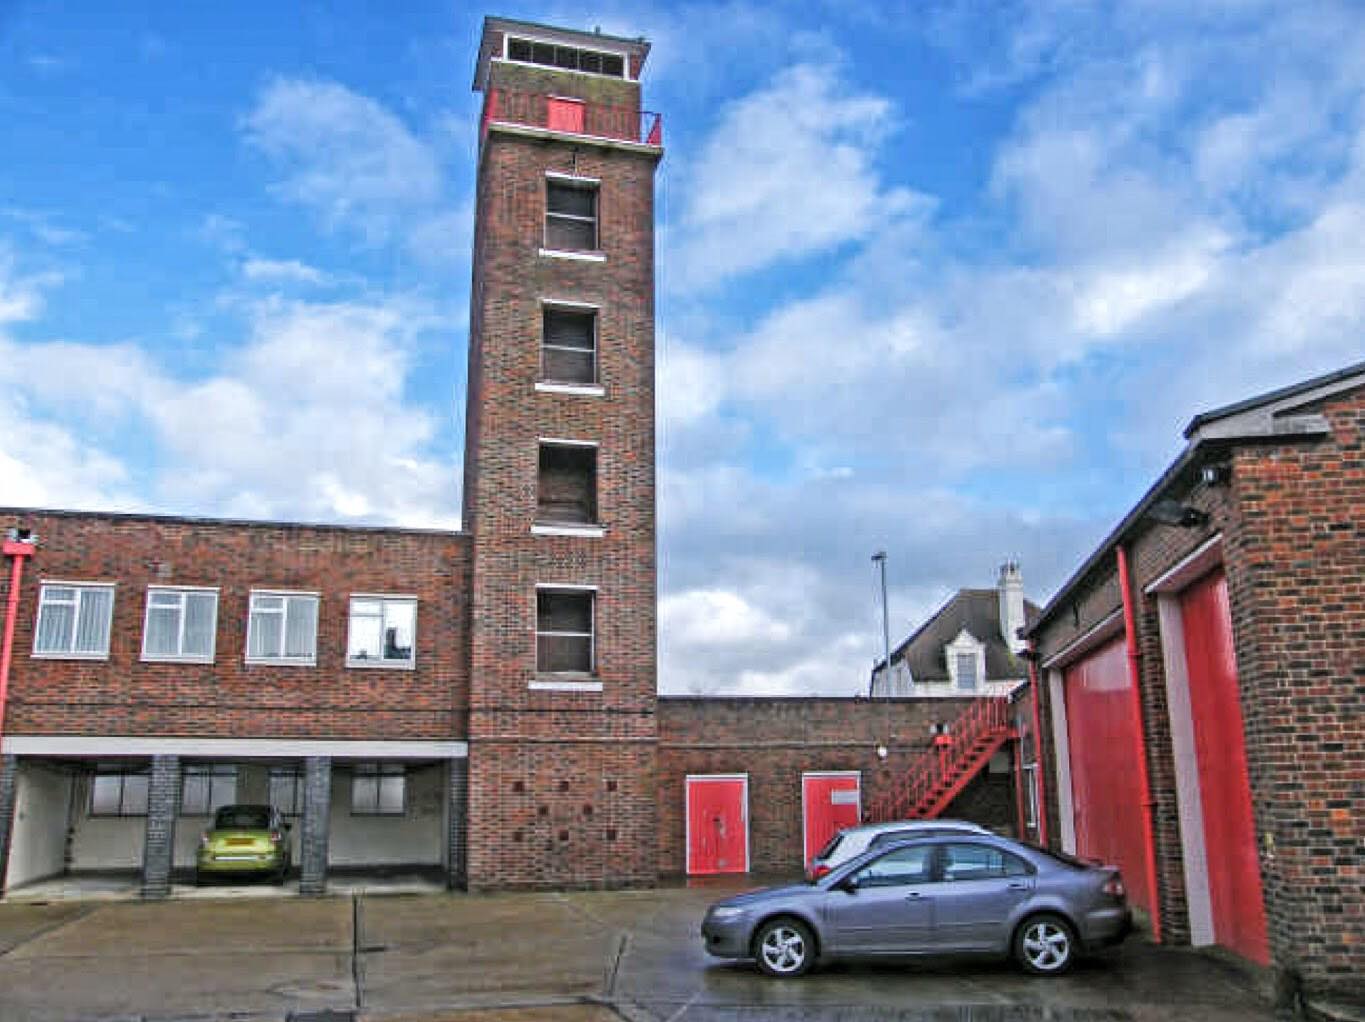 Copnor Fire Station, tower and car park